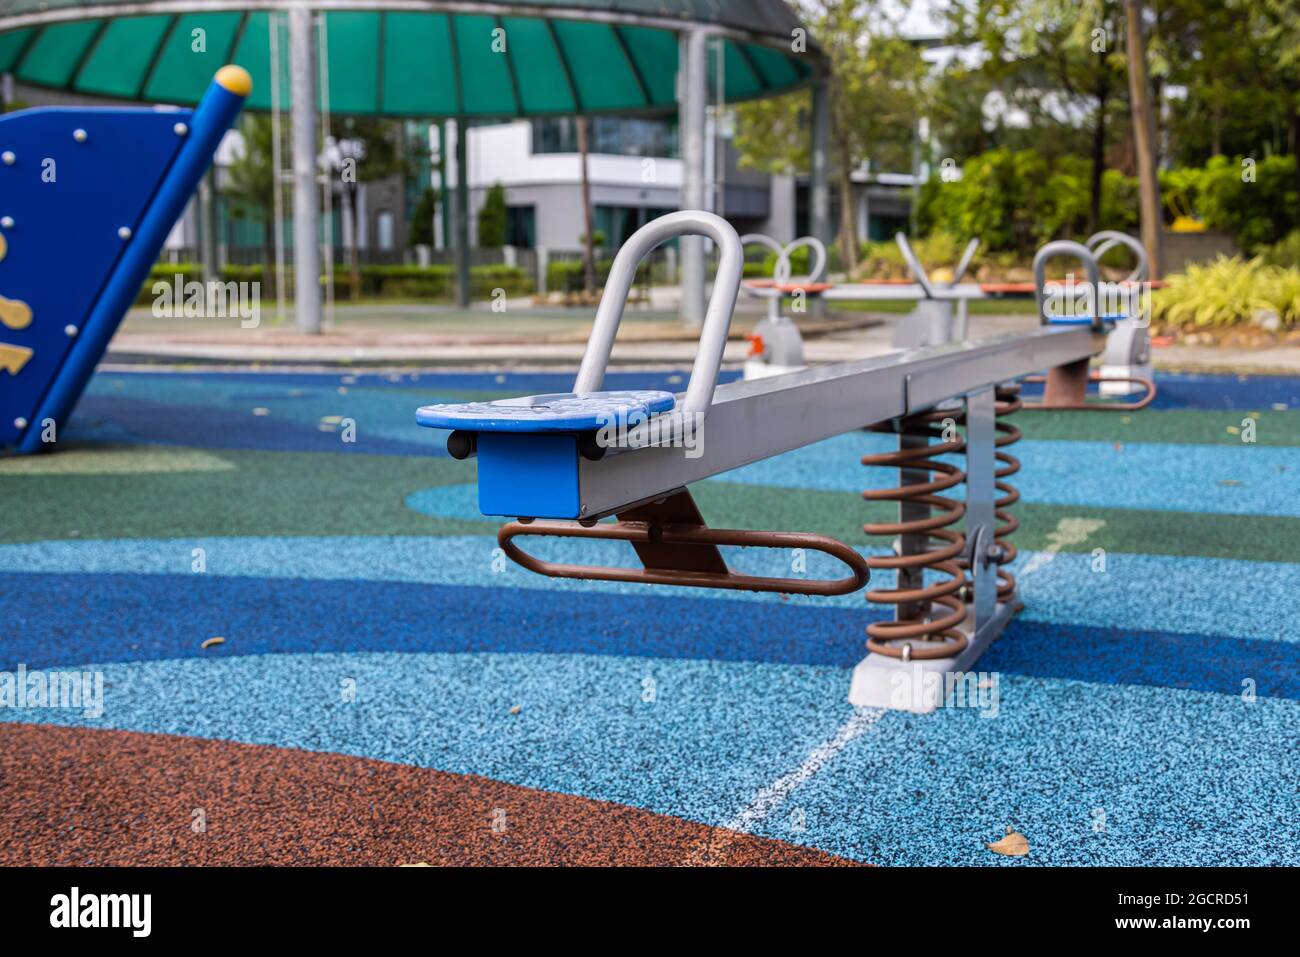 Cyberjaya, Malaysia - November 06, 2020: An abandoned seesaw in a playground. Playgrounds are blocked for use in the Corona Lock downs. Covid-19 also Stock Photo